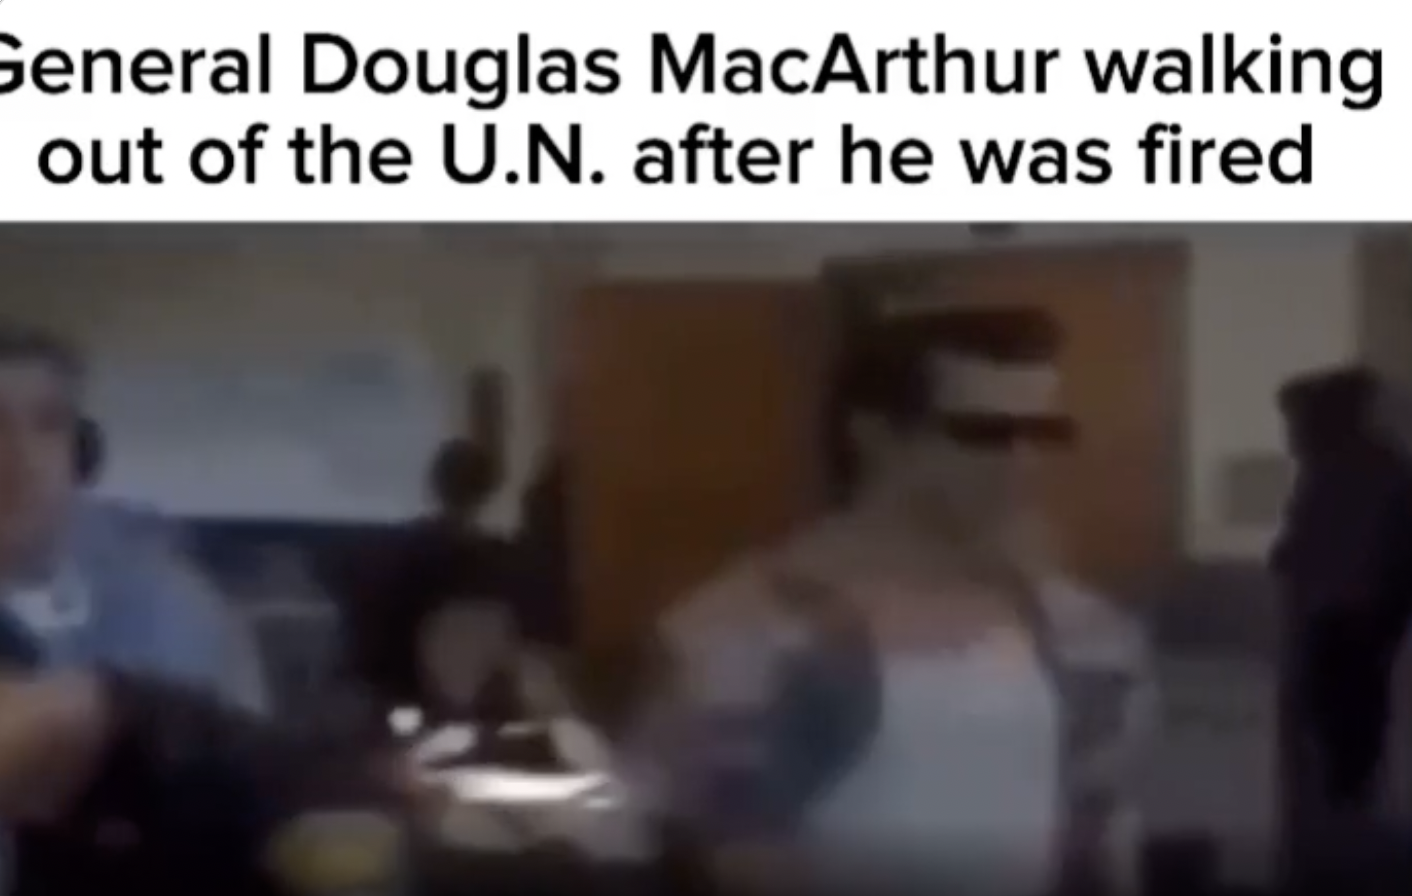 video - General Douglas MacArthur walking out of the U.N. after he was fired